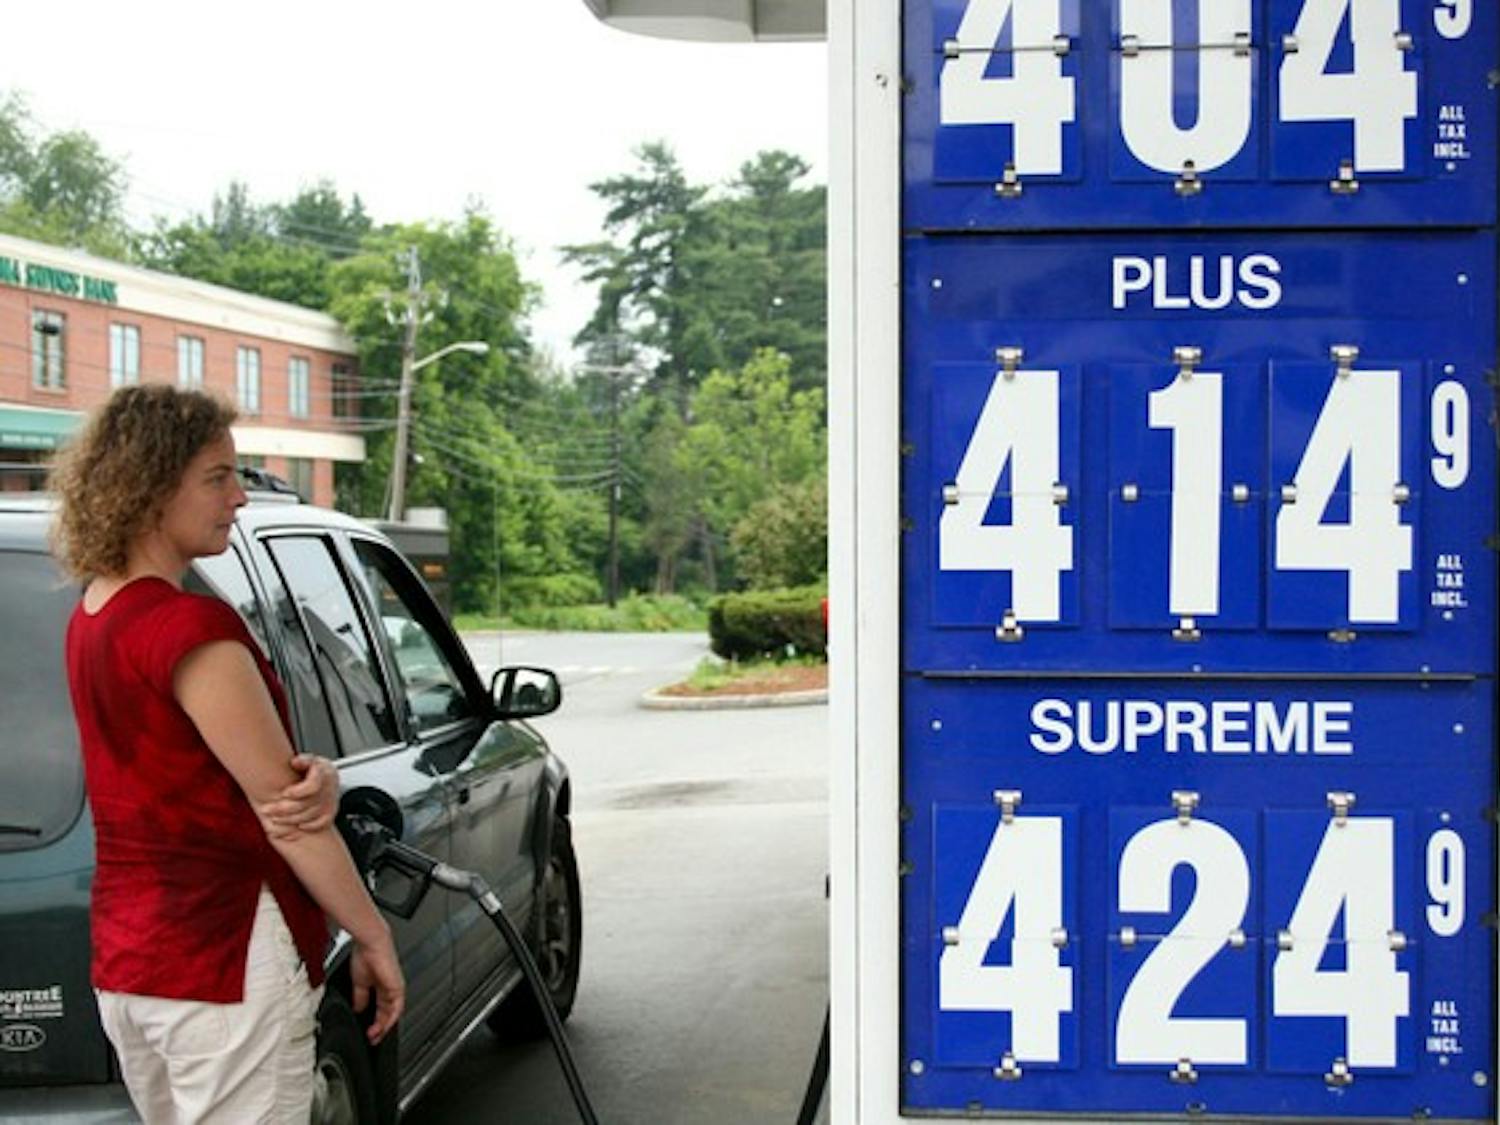 Students told The Dartmouth that this summer's high gas costs have affected their travel habits, as high prices at the pump have encouraged some to limit travel around campus and commutes home.